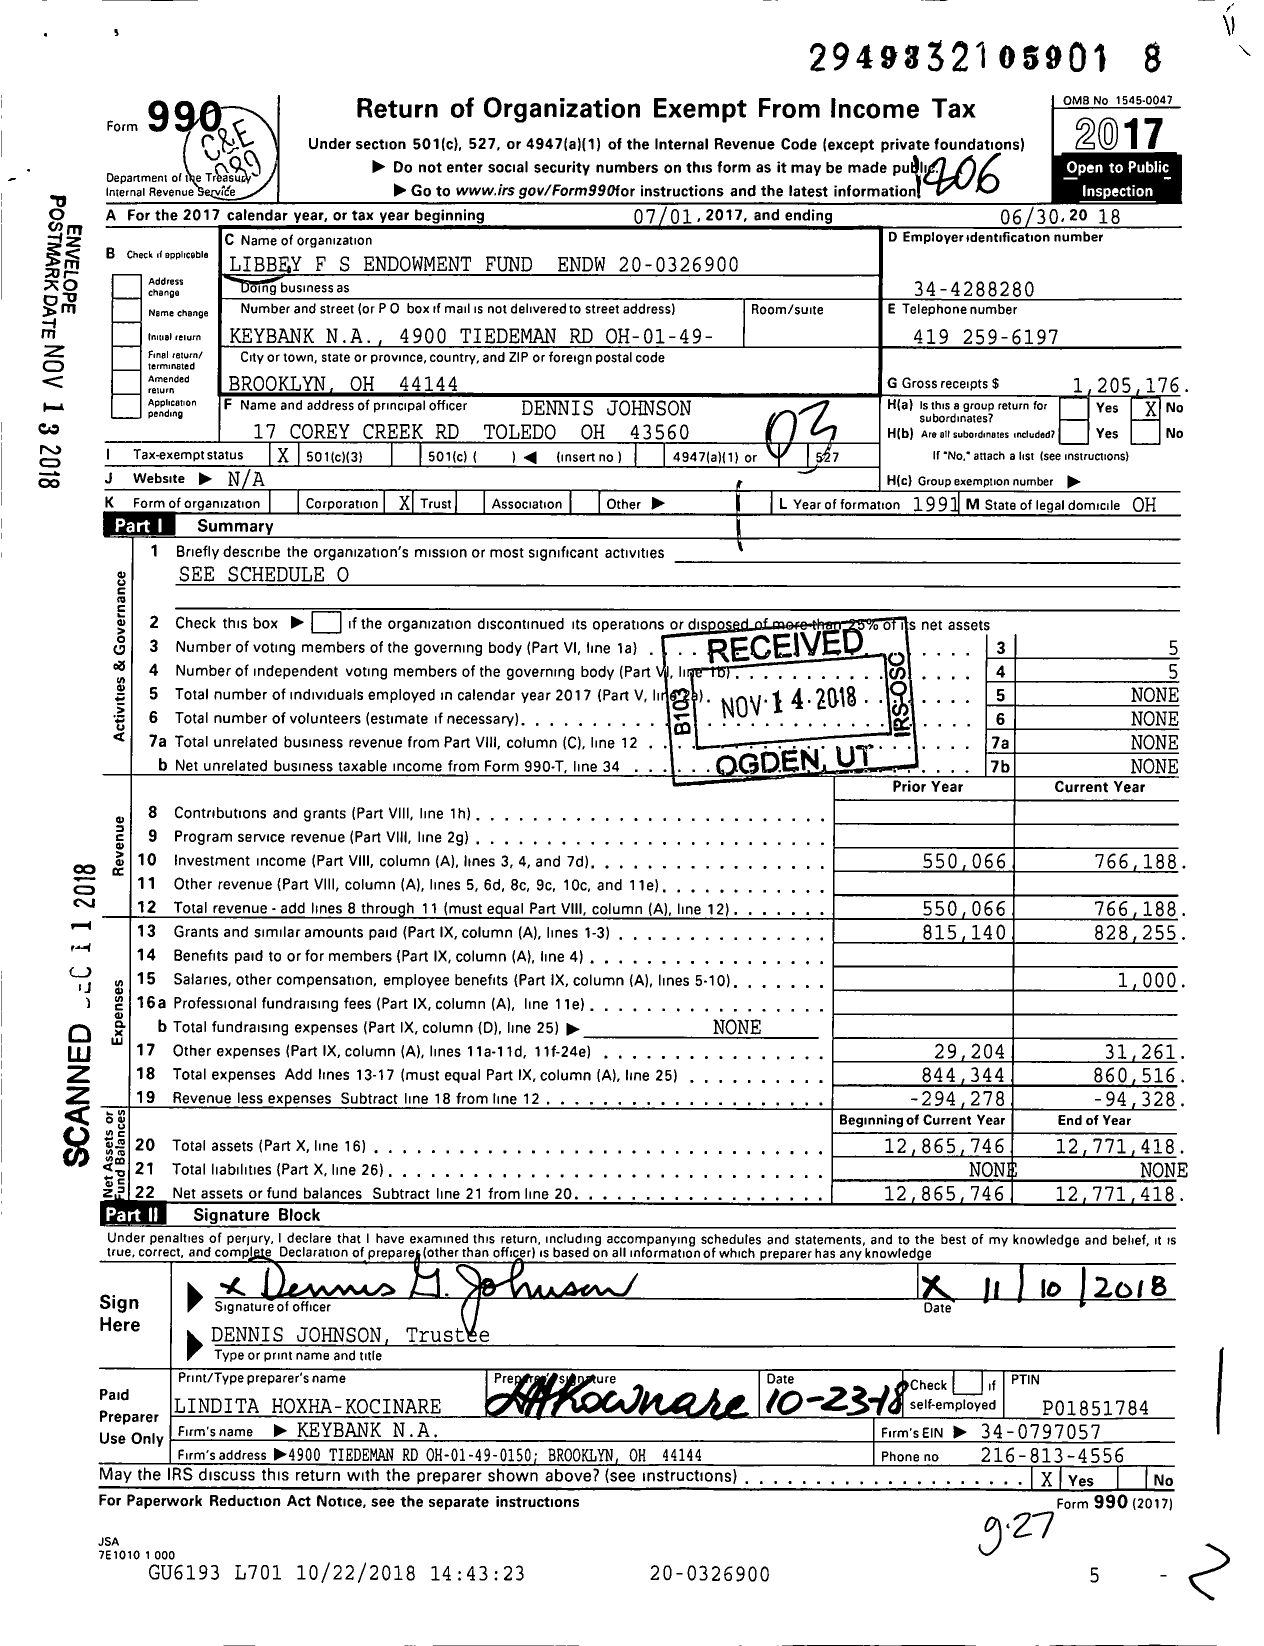 Image of first page of 2017 Form 990 for Libbey F S Endowment Fund Endw